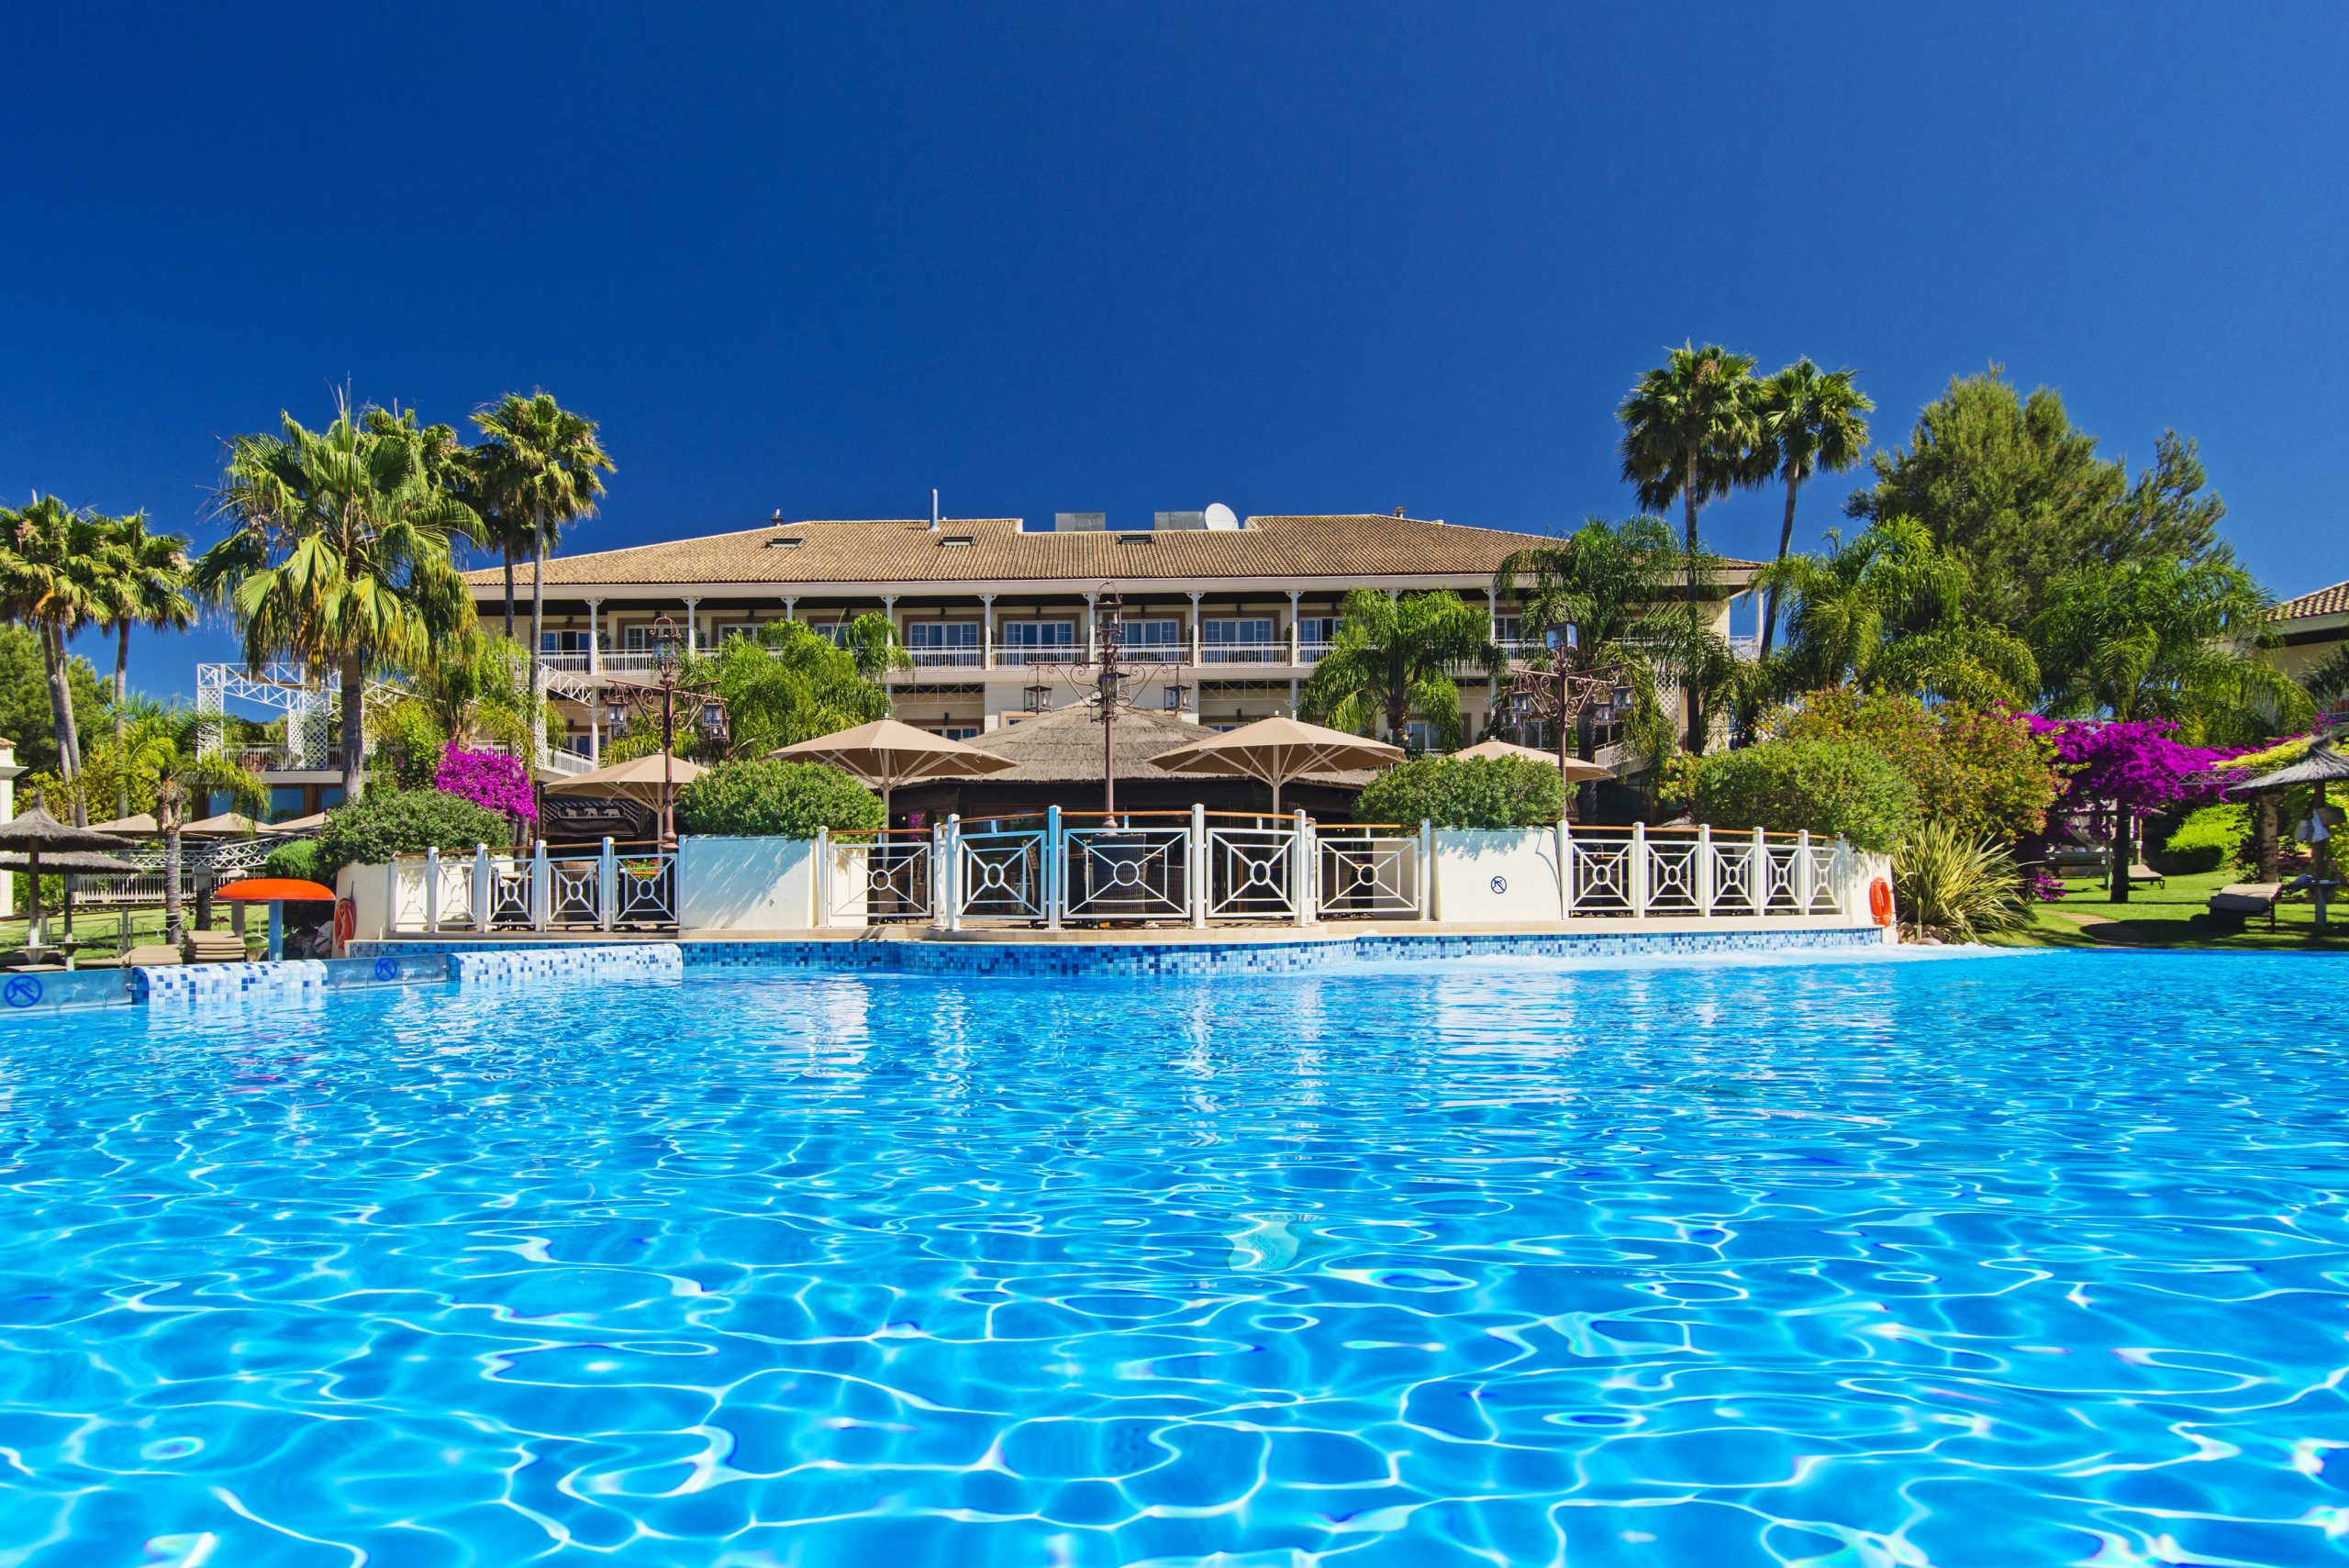 Lindner Hotel Mallorca Poolbereich